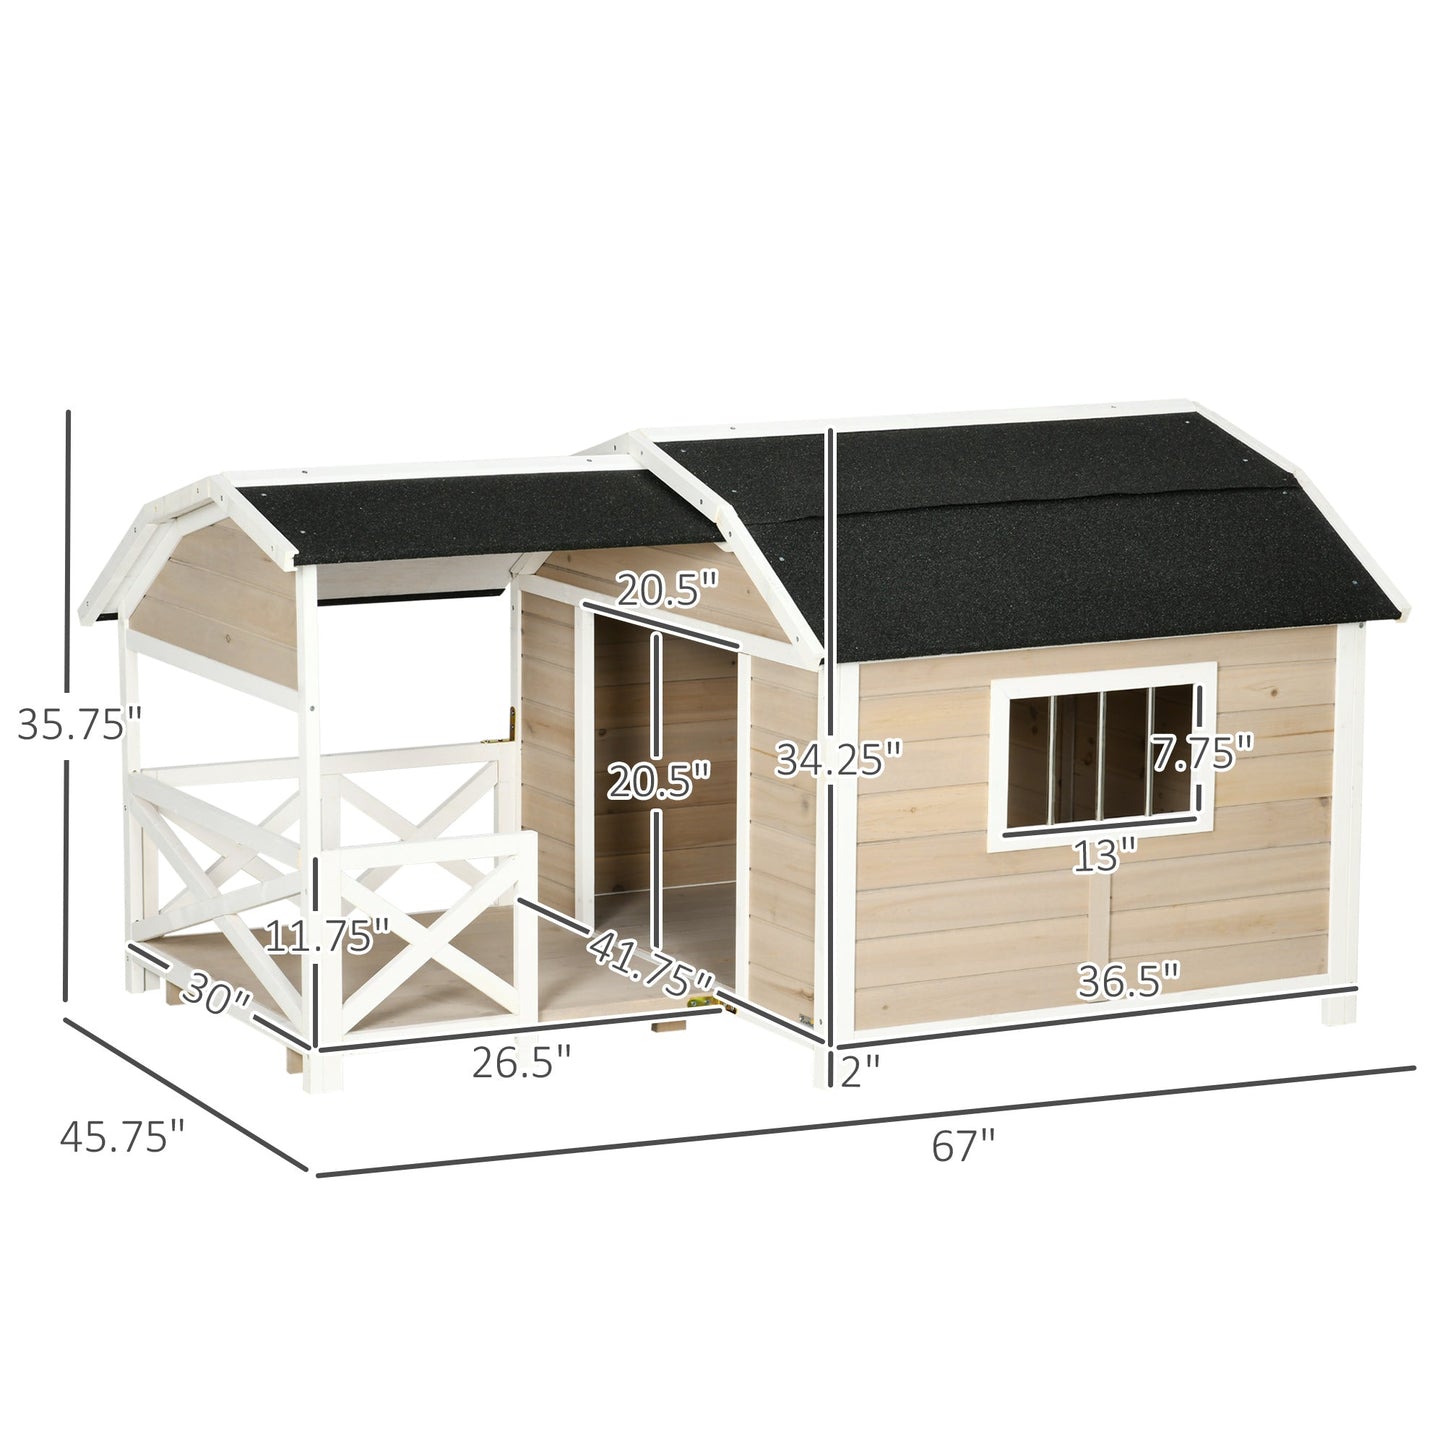 -PawHut Wooden Dog House Outdoor with Porch, Raised Pet Kennel for Medium Large Dogs, with Asphalt Roof, Front Door, Side Windows, Gray - Outdoor Style Company